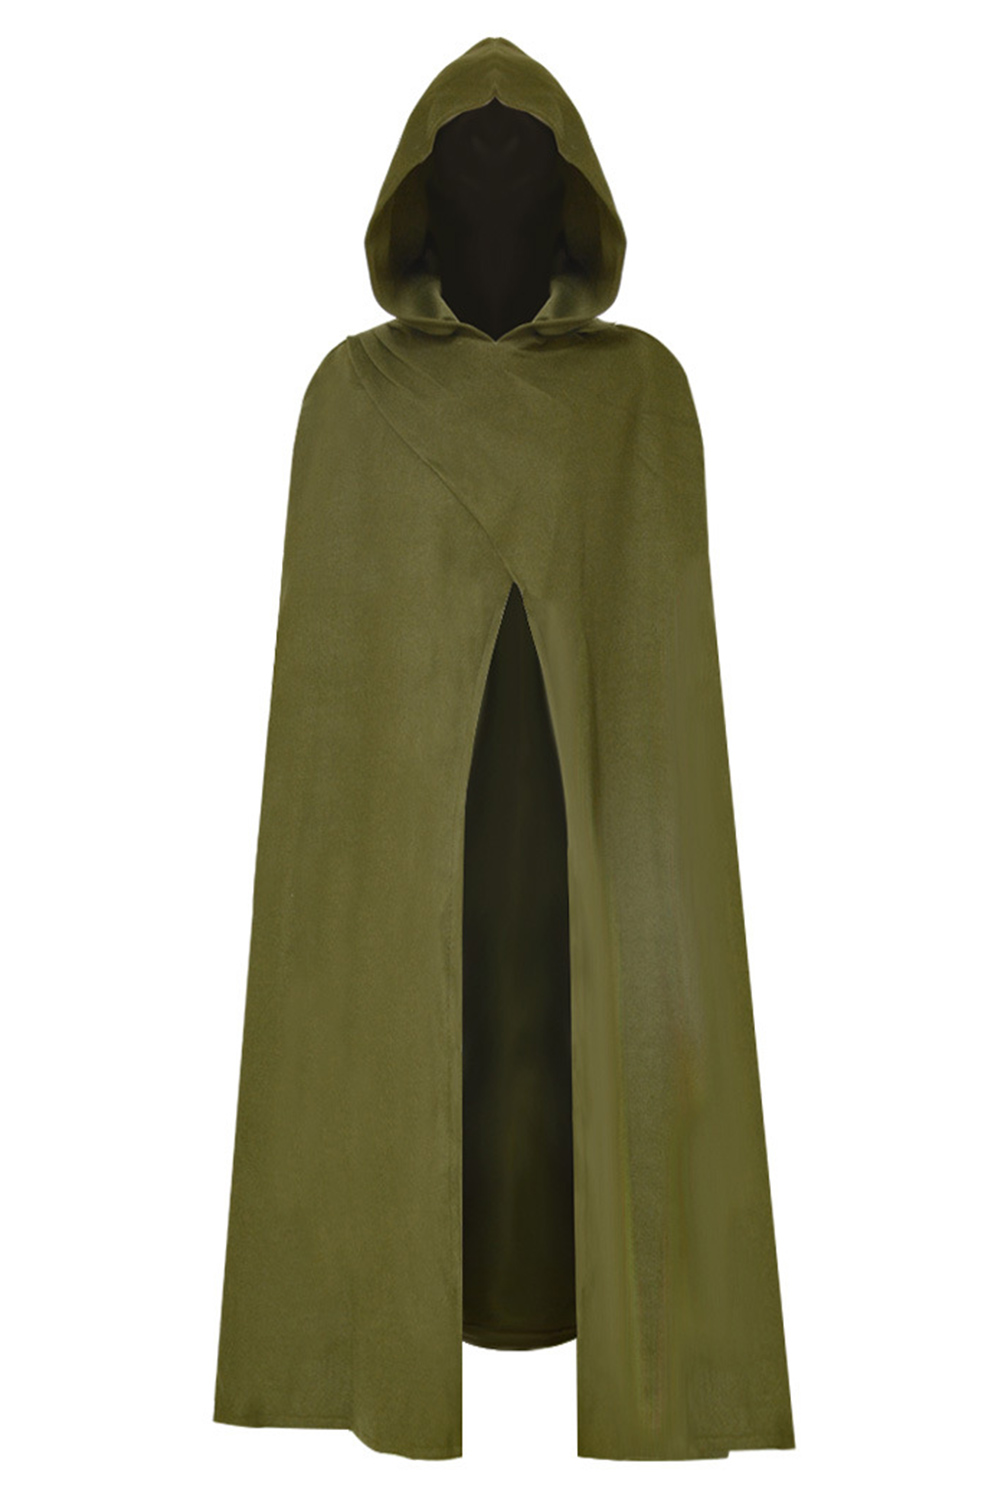 Movie The Lord of the Rings The Hobbit Medieval Cloak Outfits Halloween Carnival Suit CosplayCostume